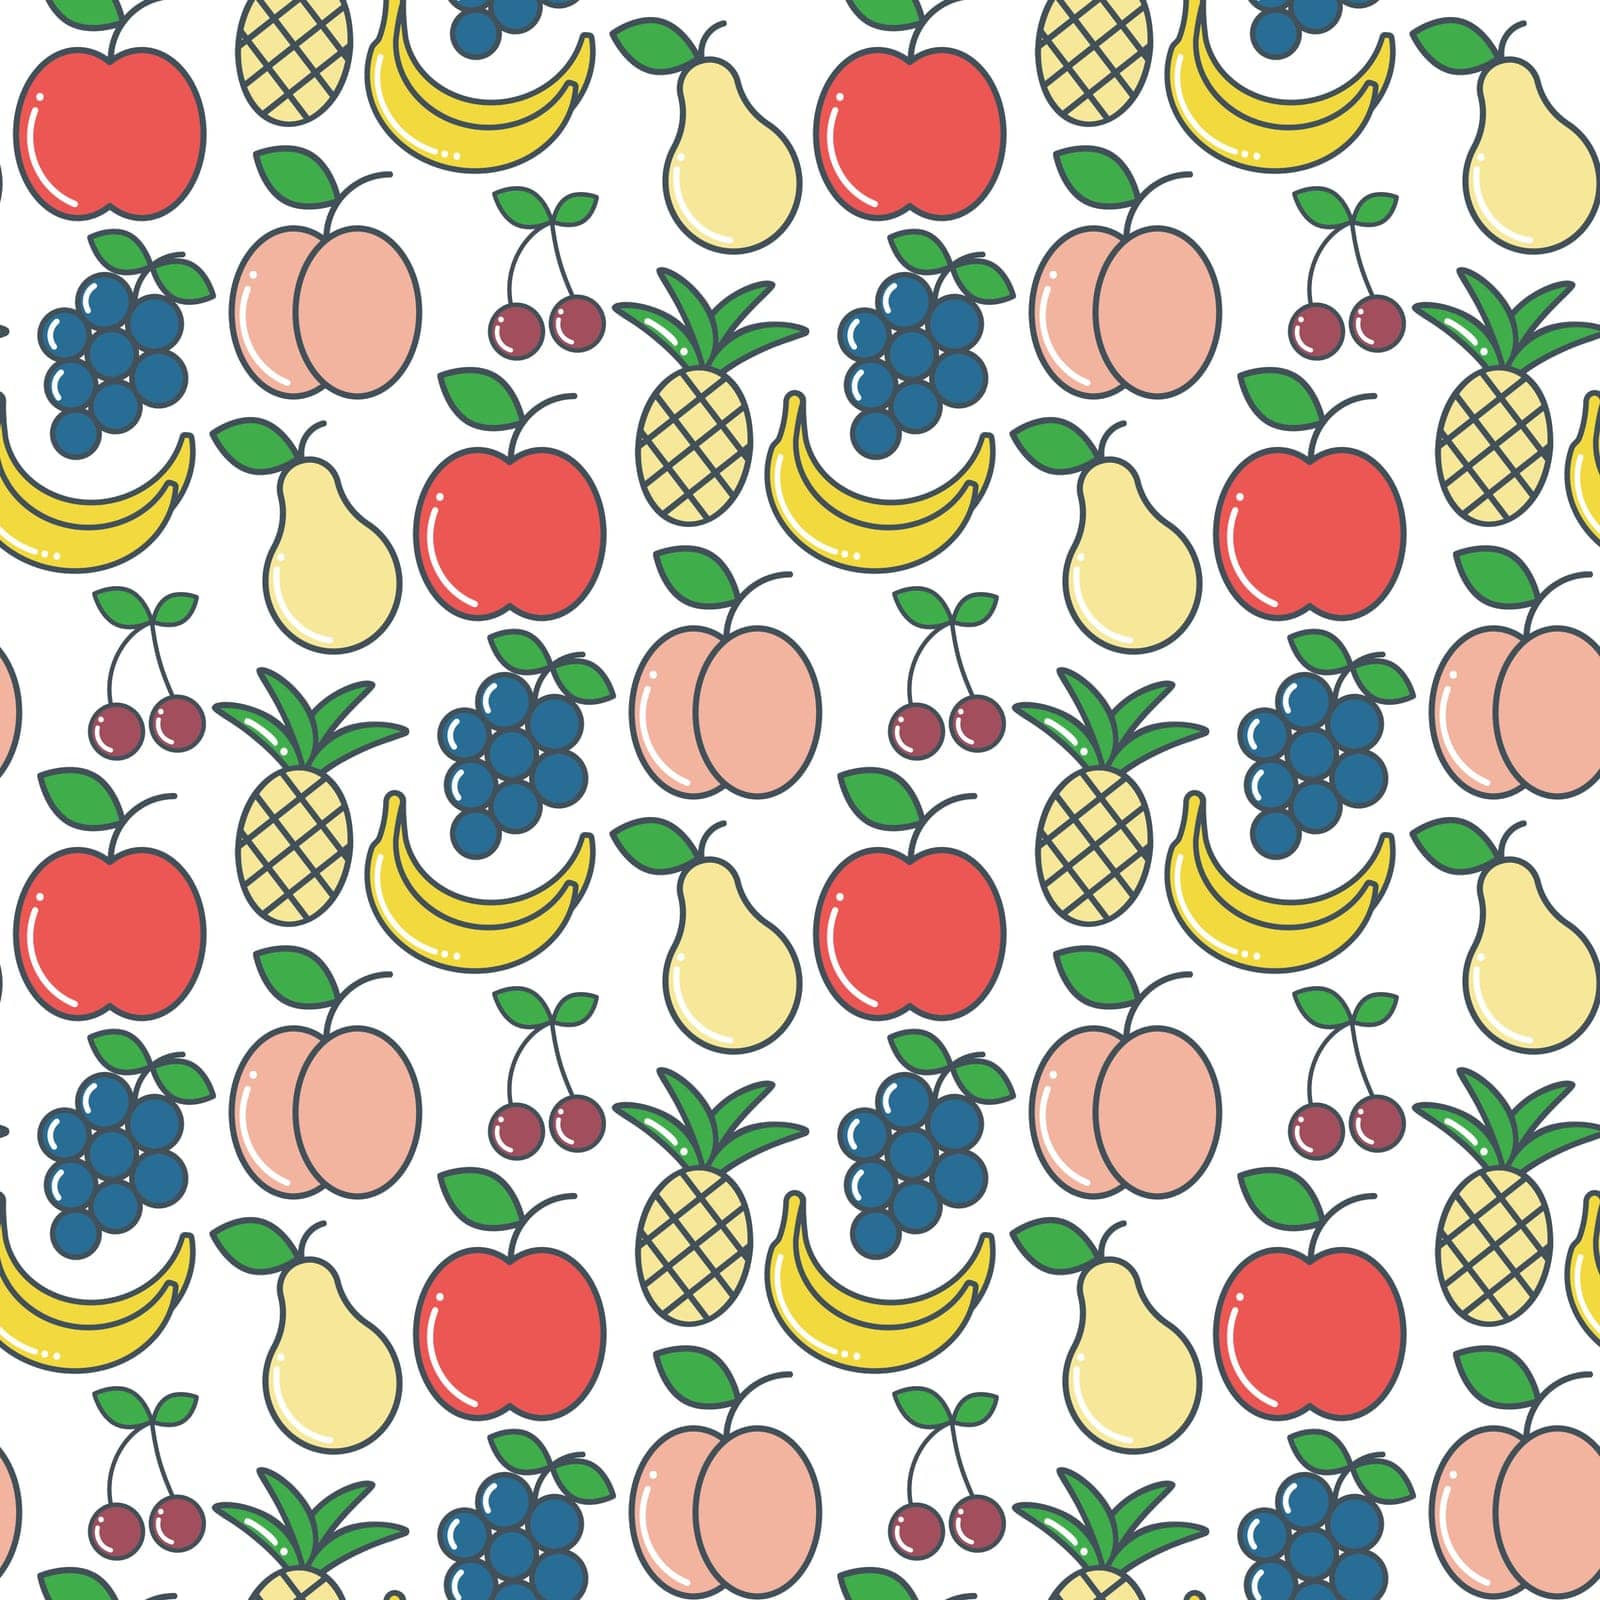 Tropical fruit background, vector illustration. Apple, peach, pineapple, banana, pear, grapes, cherry seamless pattern. Healthy organic food print flat line icon style